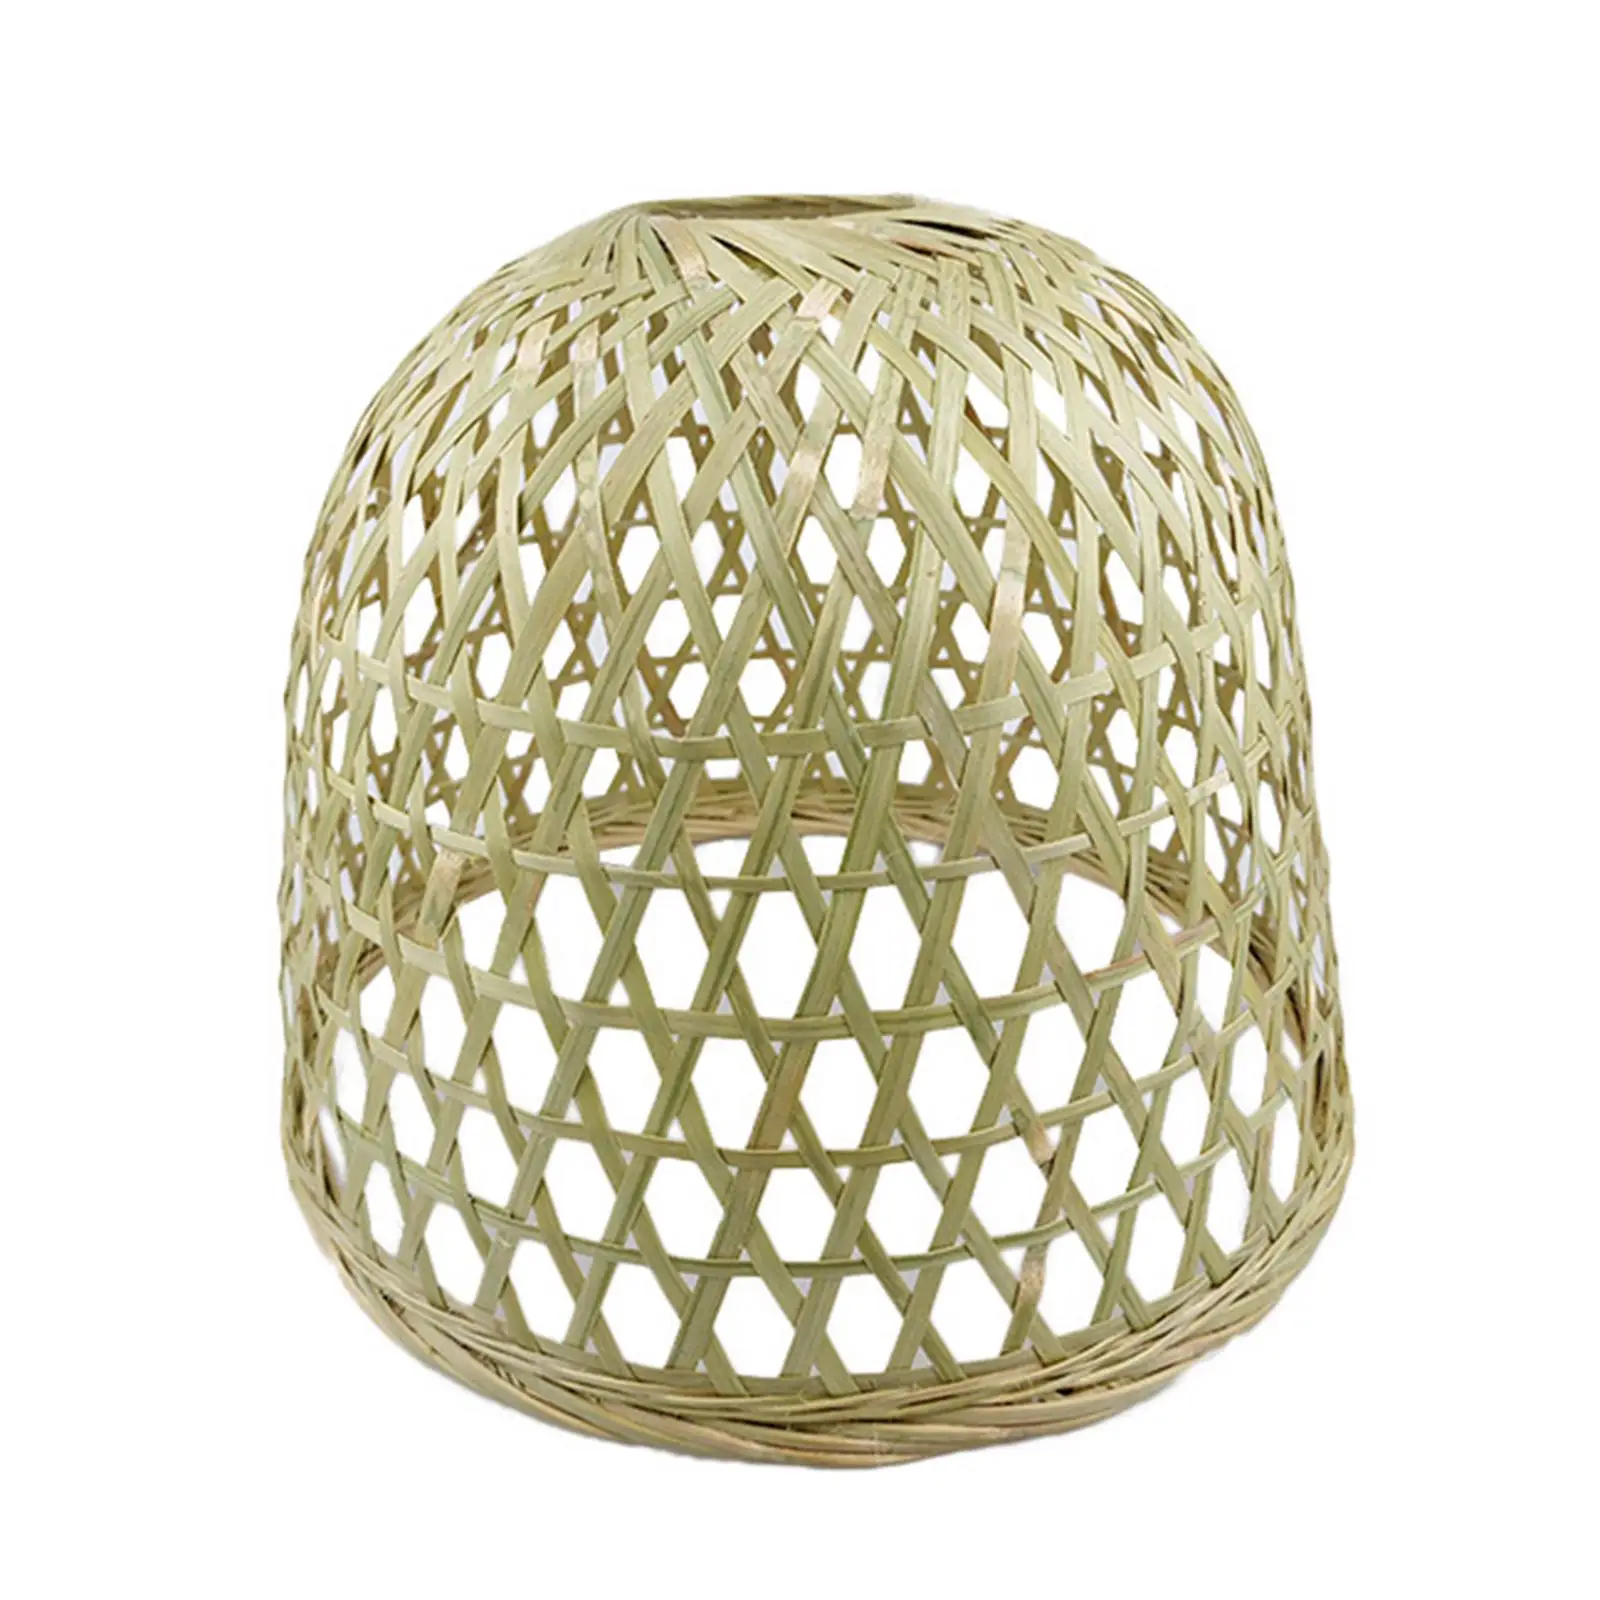 Bamboo Woven Lampshade Rustic Vintage Decoration Durable Minimalist Simple Easy Install Stylish for Kitchen Island Teahouse Cafe